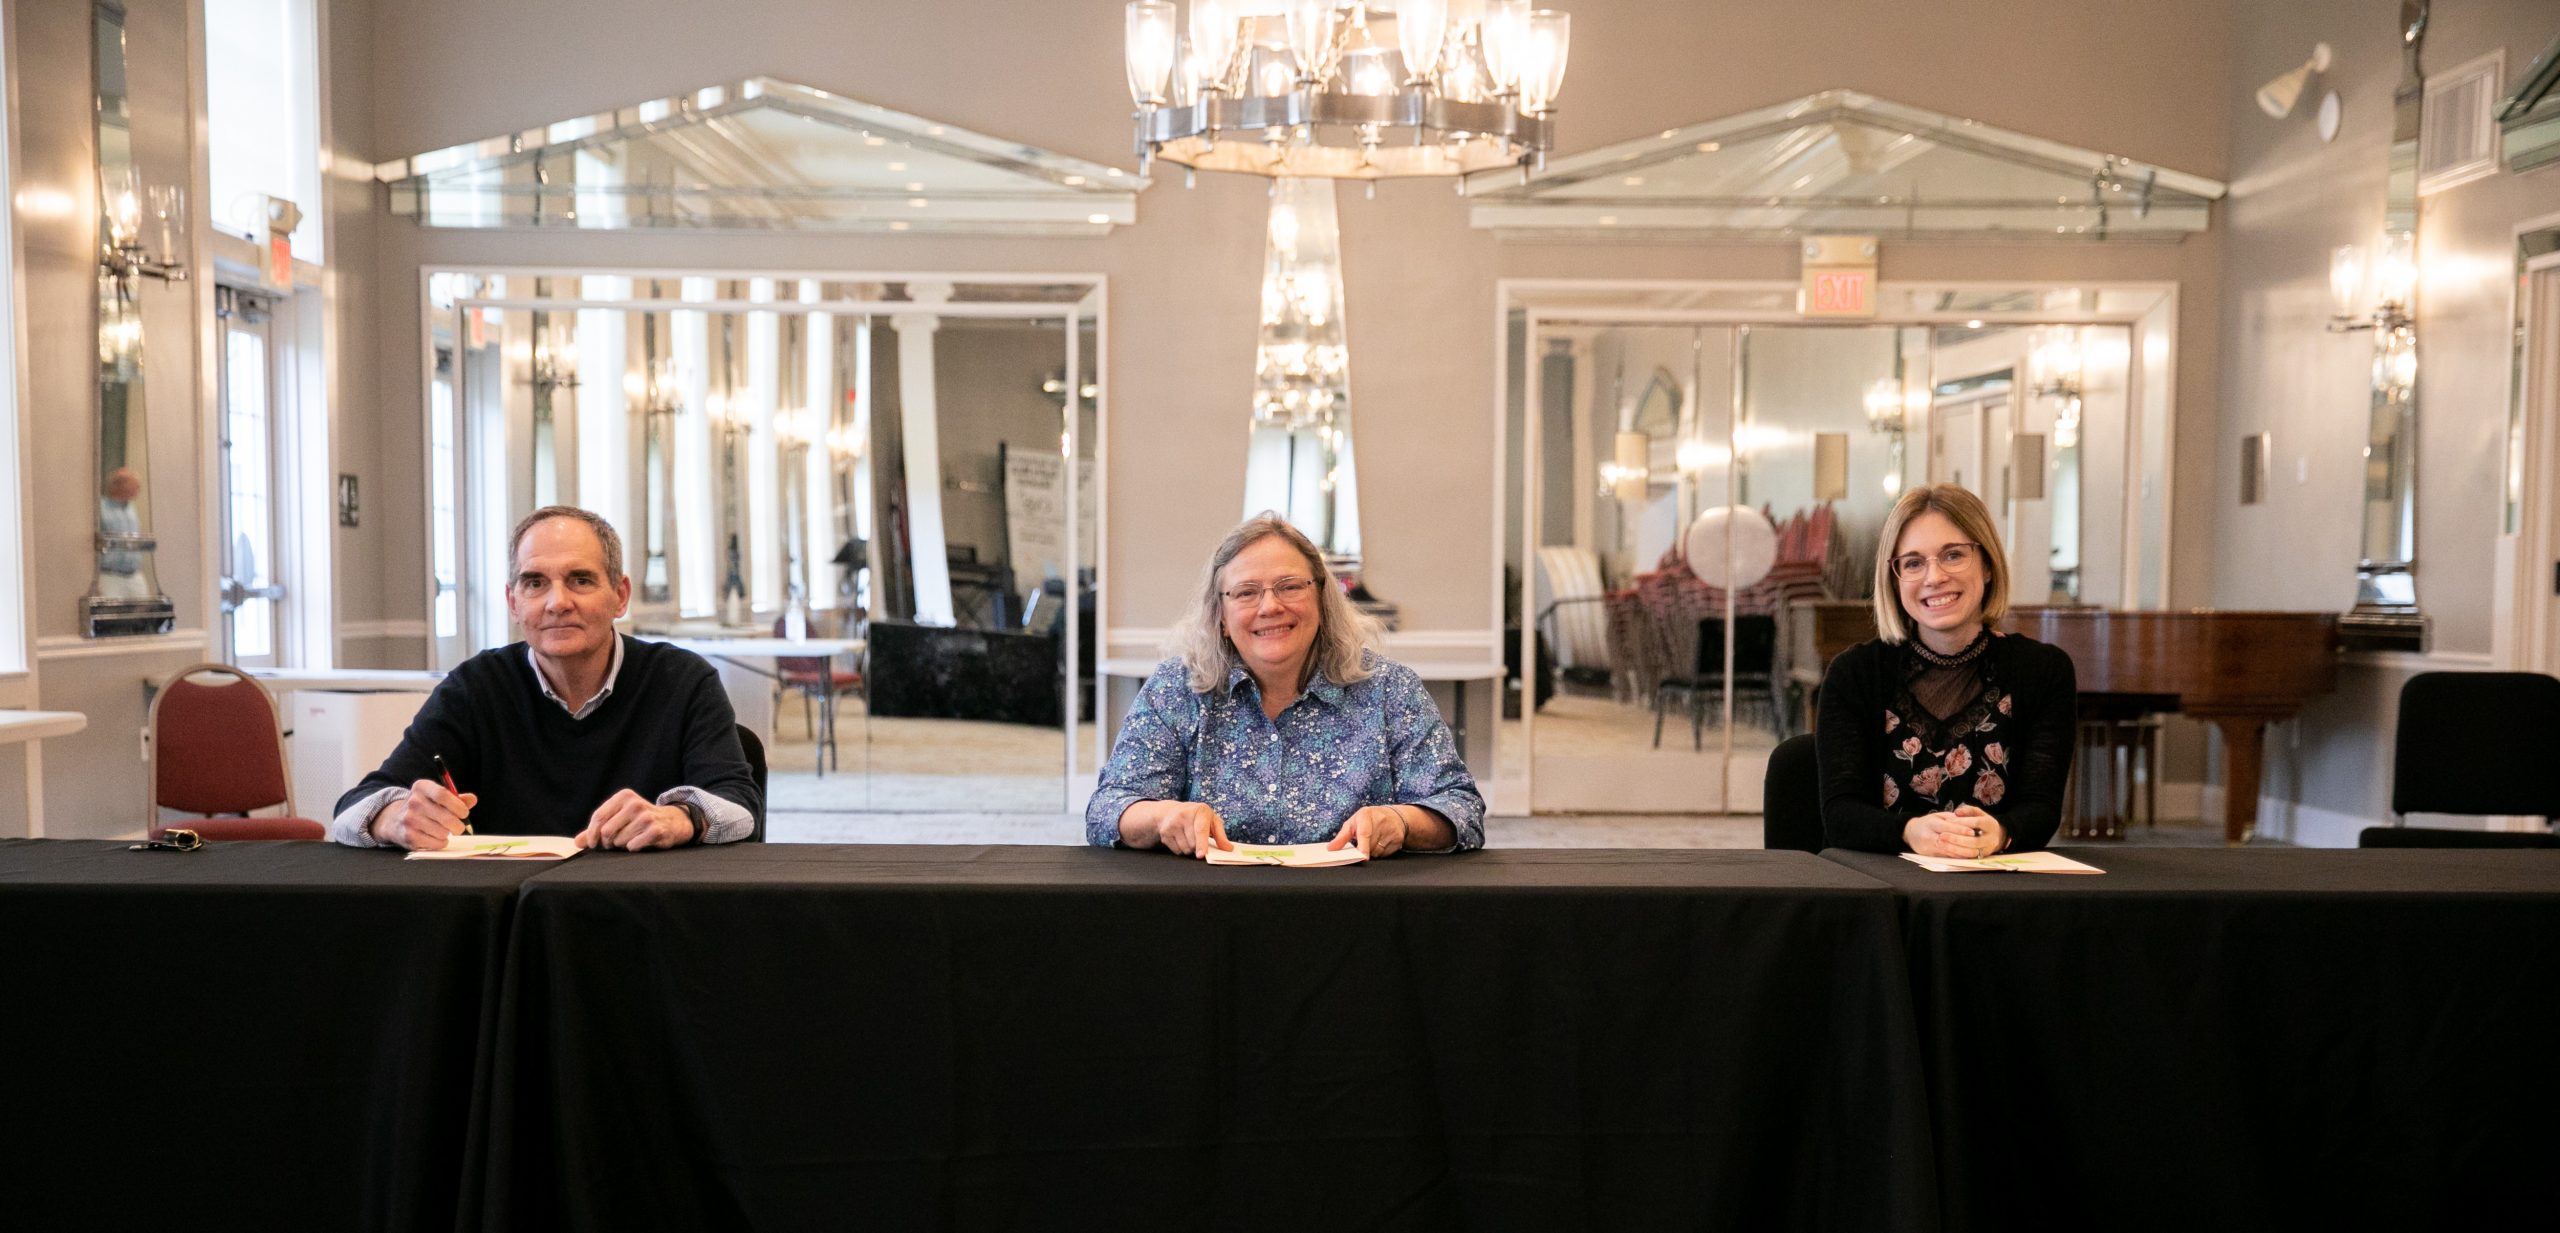 2022 Gala Judges at Community Music School Thank you to our 2022 Gala Judges: Kaylee Santanello, Director of Middle School Orchestras, Parkland School District; Dave Matsinko, retired educator and folk musician; and Patrice Kidd, retired Director of Music, Moravian Academy Middle School. 